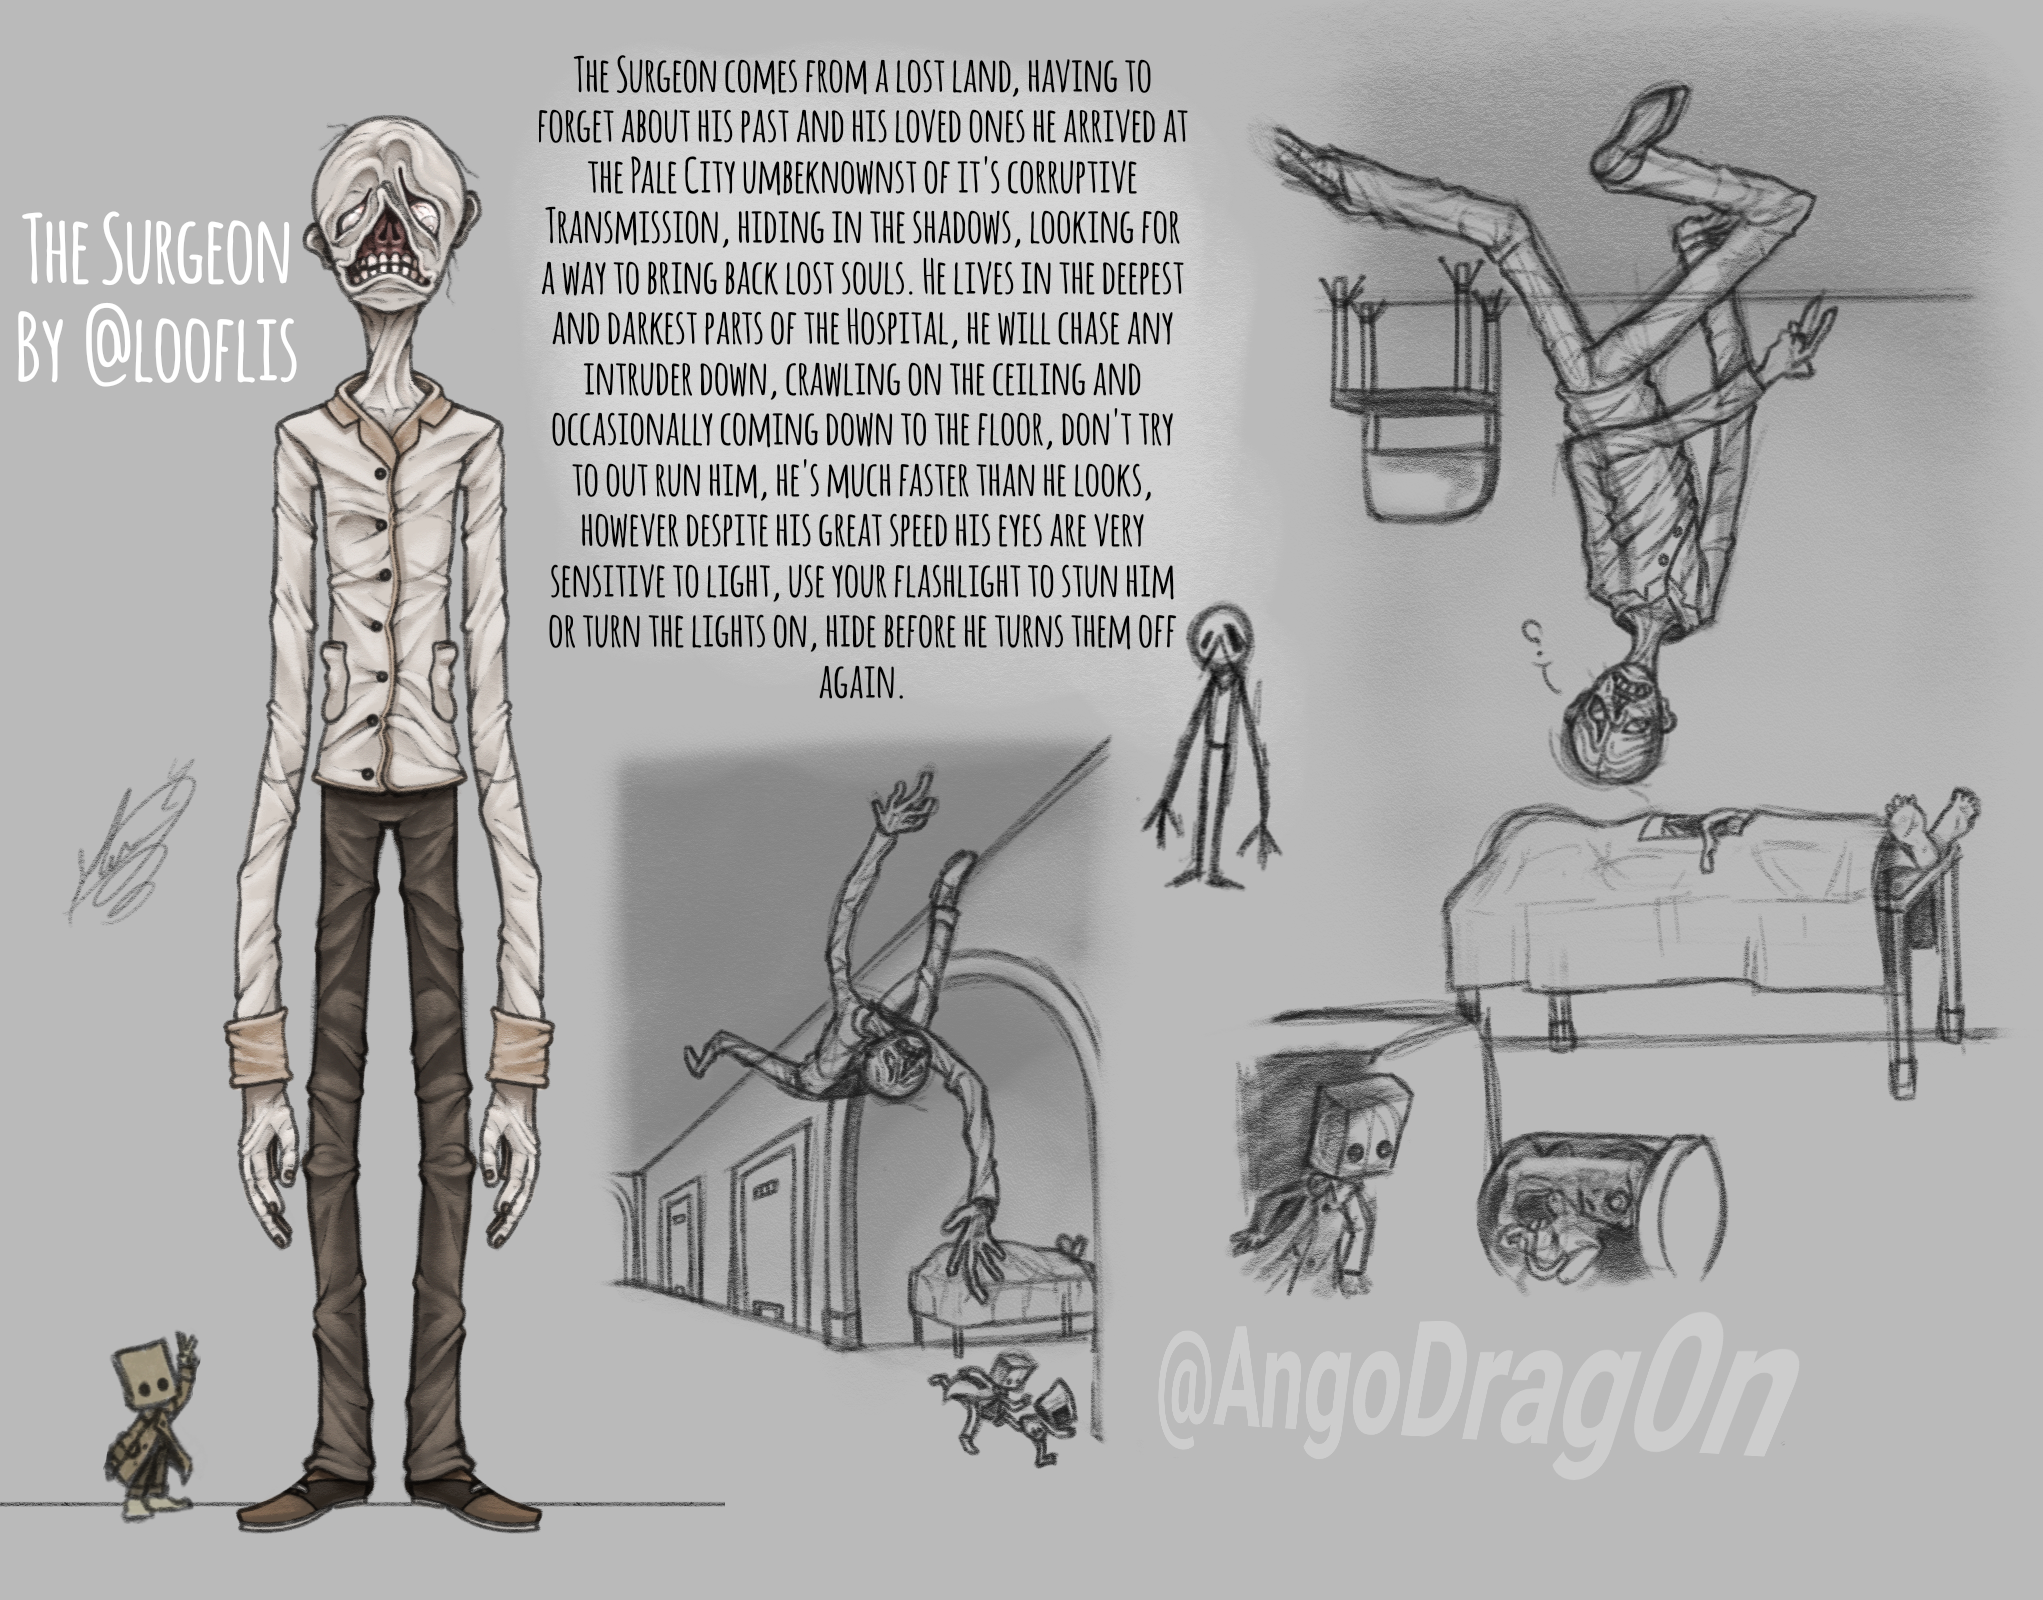 Fan Made Concept Art Of The Doctor Little Nightmares II (Not Made